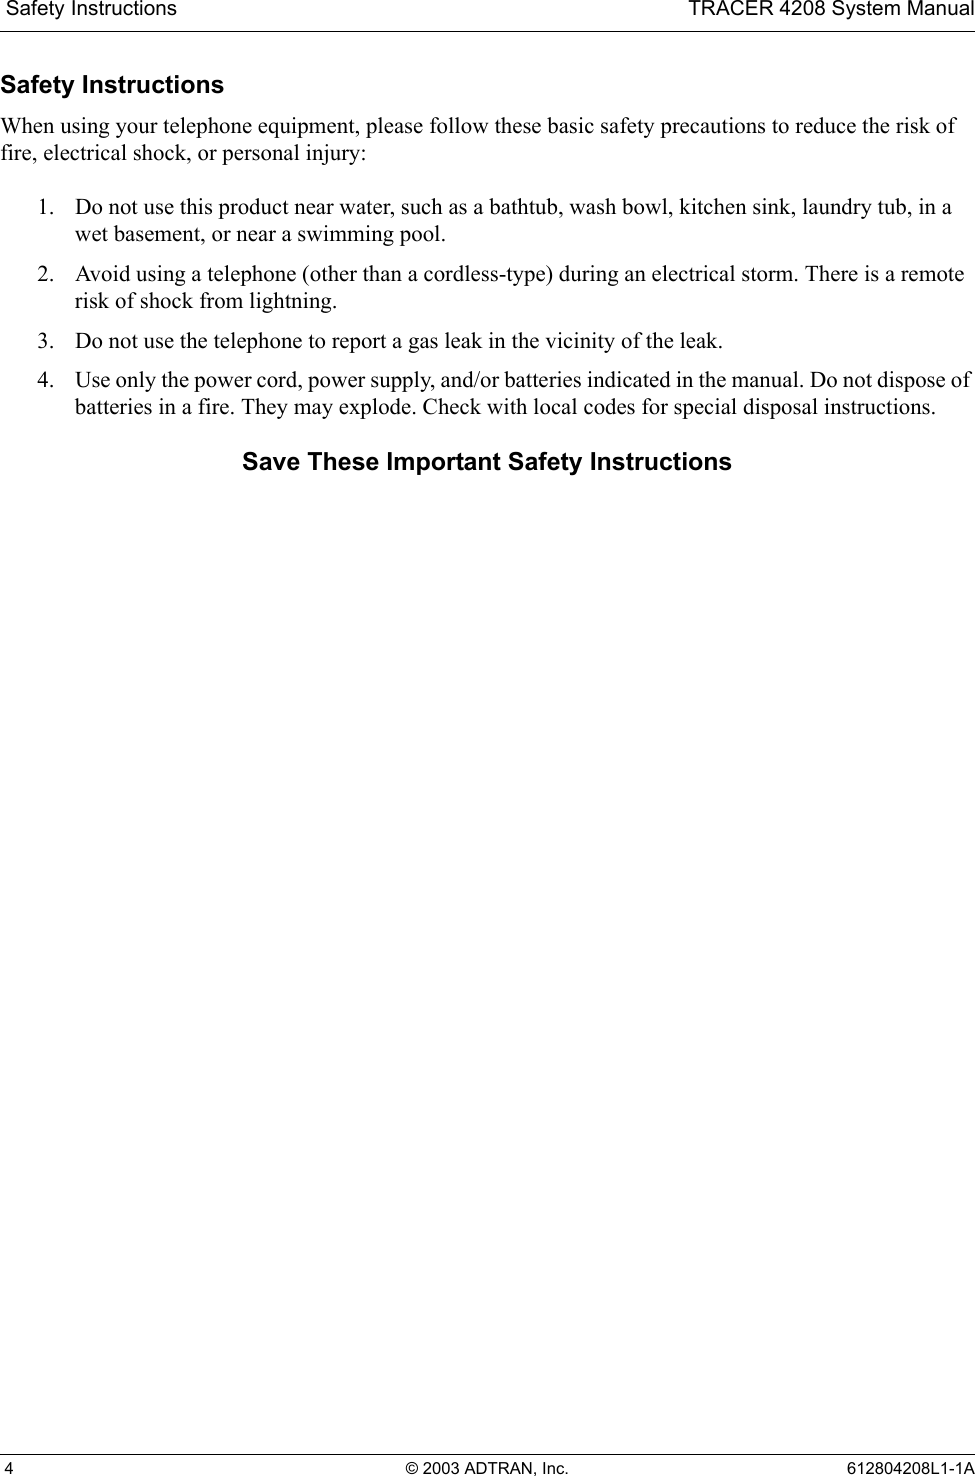  Safety Instructions TRACER 4208 System Manual 4 © 2003 ADTRAN, Inc. 612804208L1-1ASafety InstructionsWhen using your telephone equipment, please follow these basic safety precautions to reduce the risk of fire, electrical shock, or personal injury:1. Do not use this product near water, such as a bathtub, wash bowl, kitchen sink, laundry tub, in a wet basement, or near a swimming pool.2. Avoid using a telephone (other than a cordless-type) during an electrical storm. There is a remote risk of shock from lightning.3. Do not use the telephone to report a gas leak in the vicinity of the leak.4. Use only the power cord, power supply, and/or batteries indicated in the manual. Do not dispose of batteries in a fire. They may explode. Check with local codes for special disposal instructions.Save These Important Safety Instructions